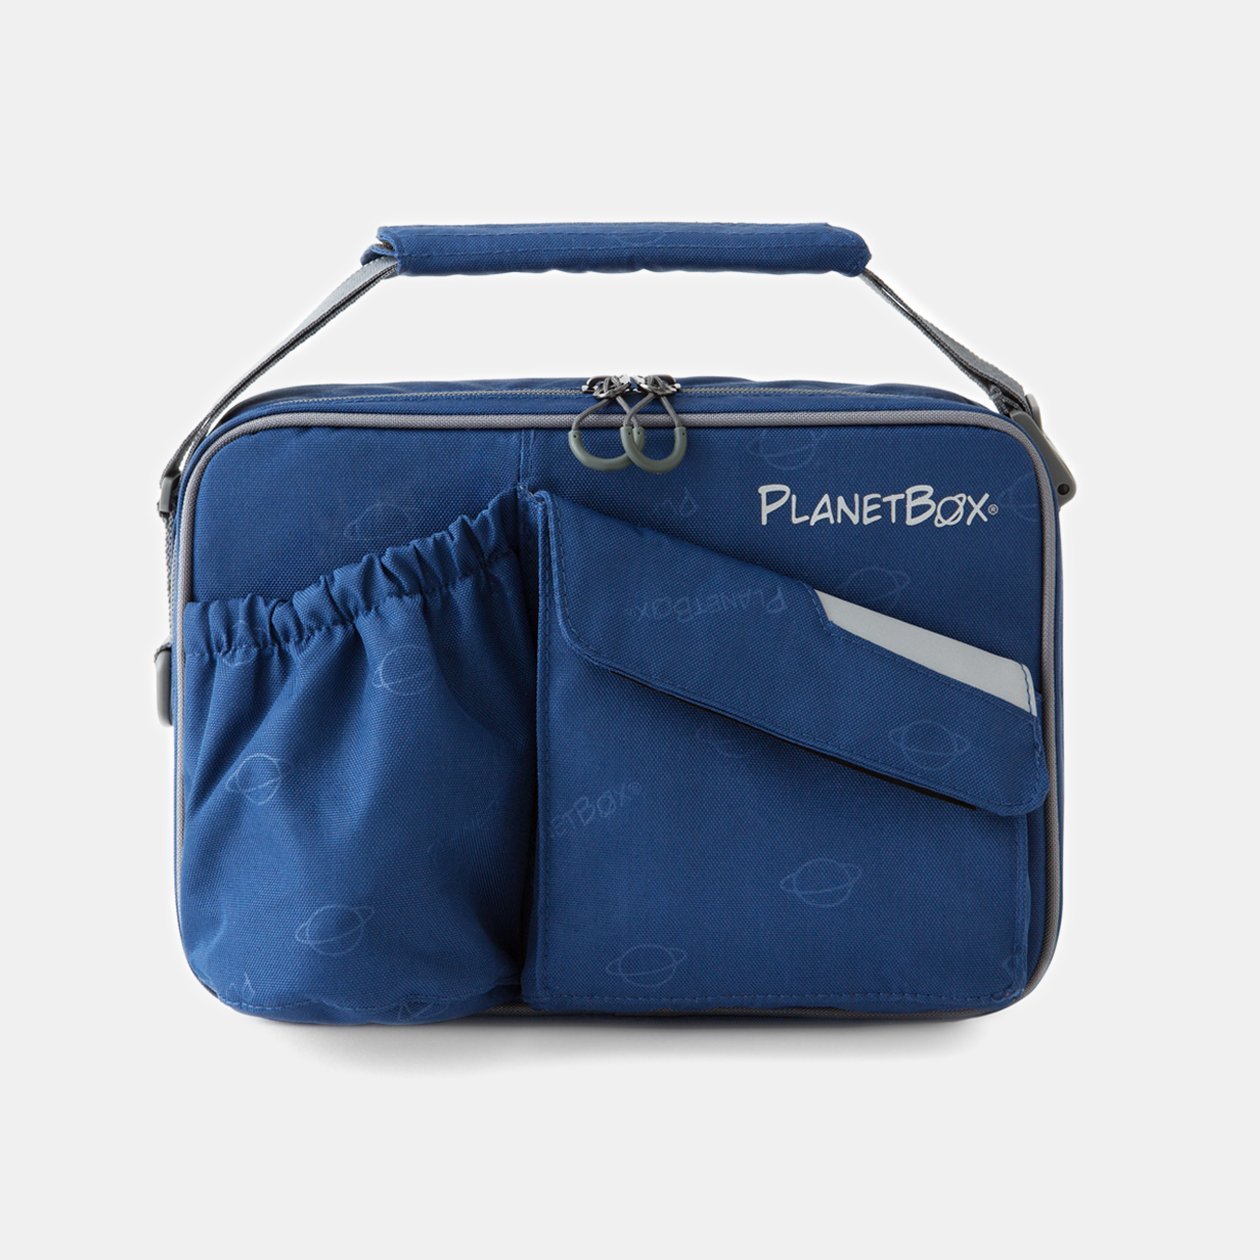 PlanetBox | Rover or Launch Insulated Carry Bag - Plain